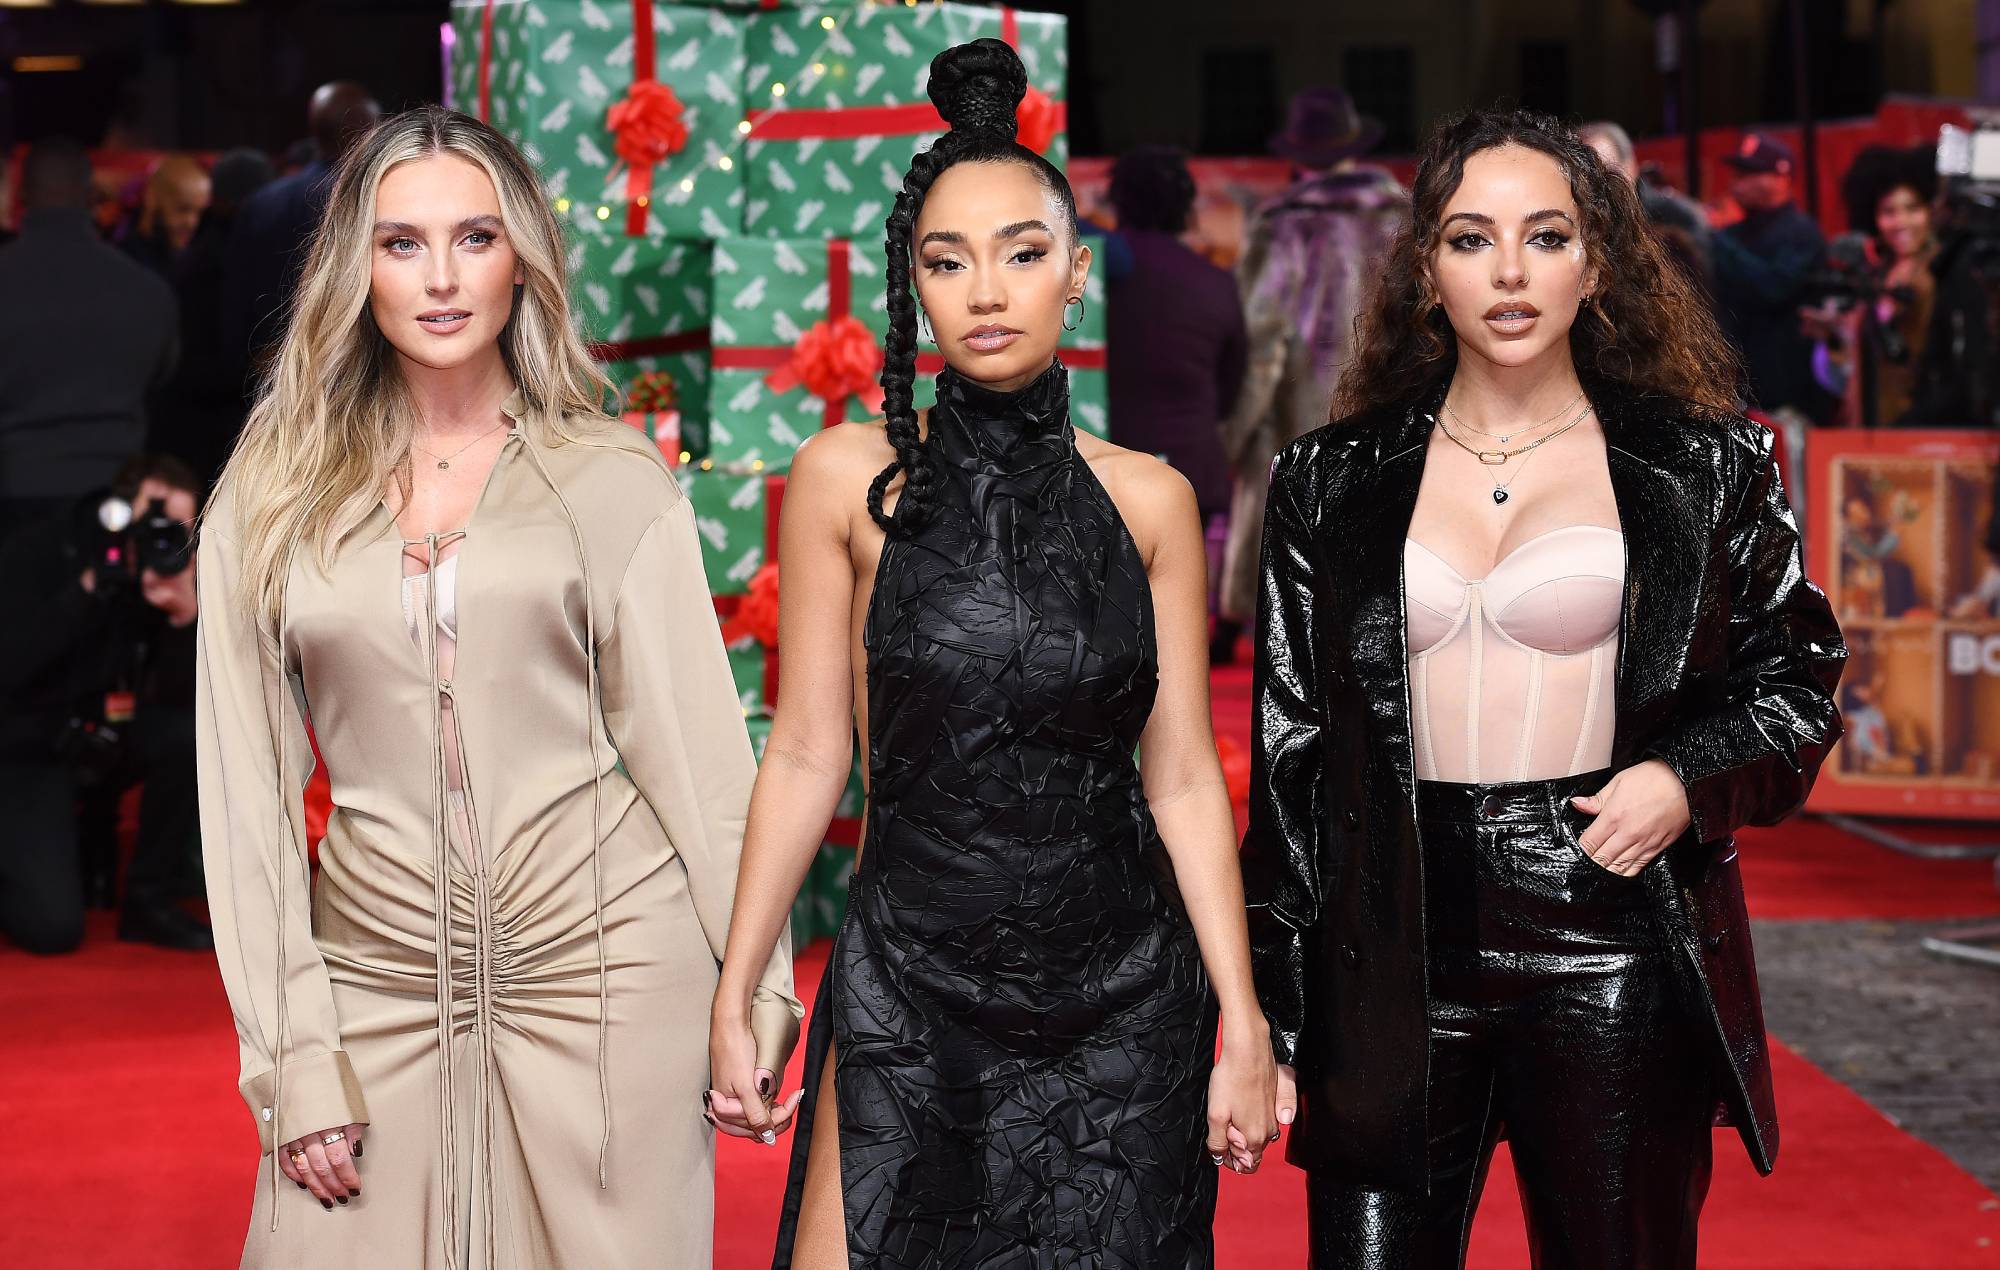 Leigh-Anne Pinnock says Little Mix needed therapy after Jesy Nelson’s “traumatic” departure